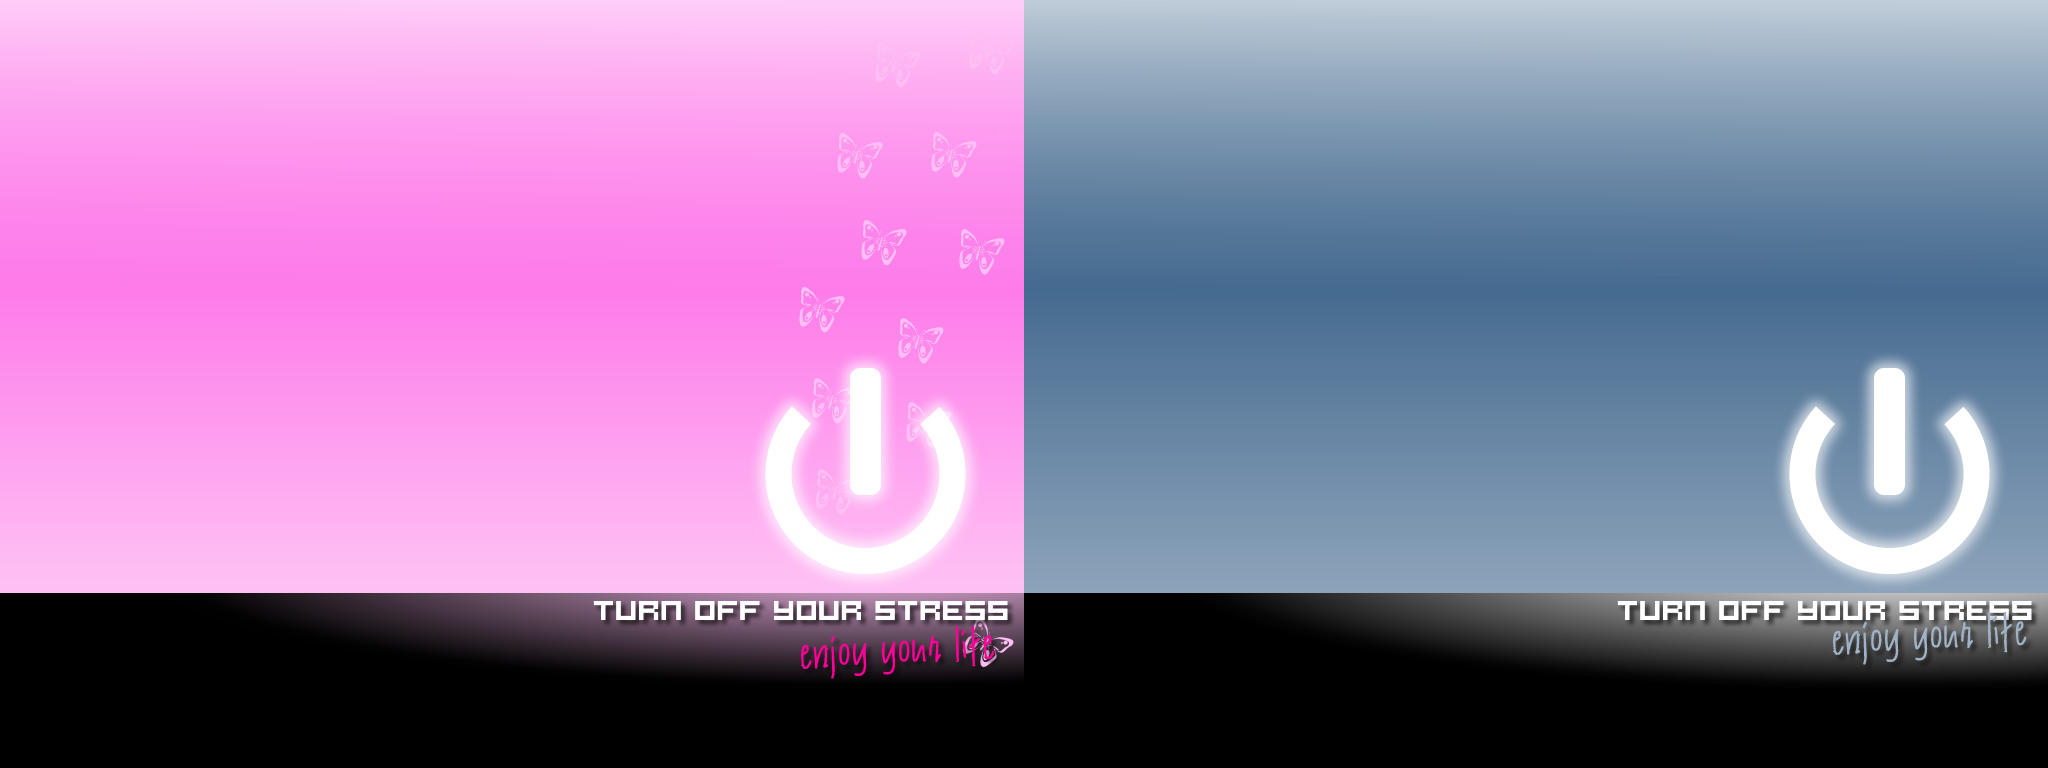 Turn of your Stress   2 by cesars